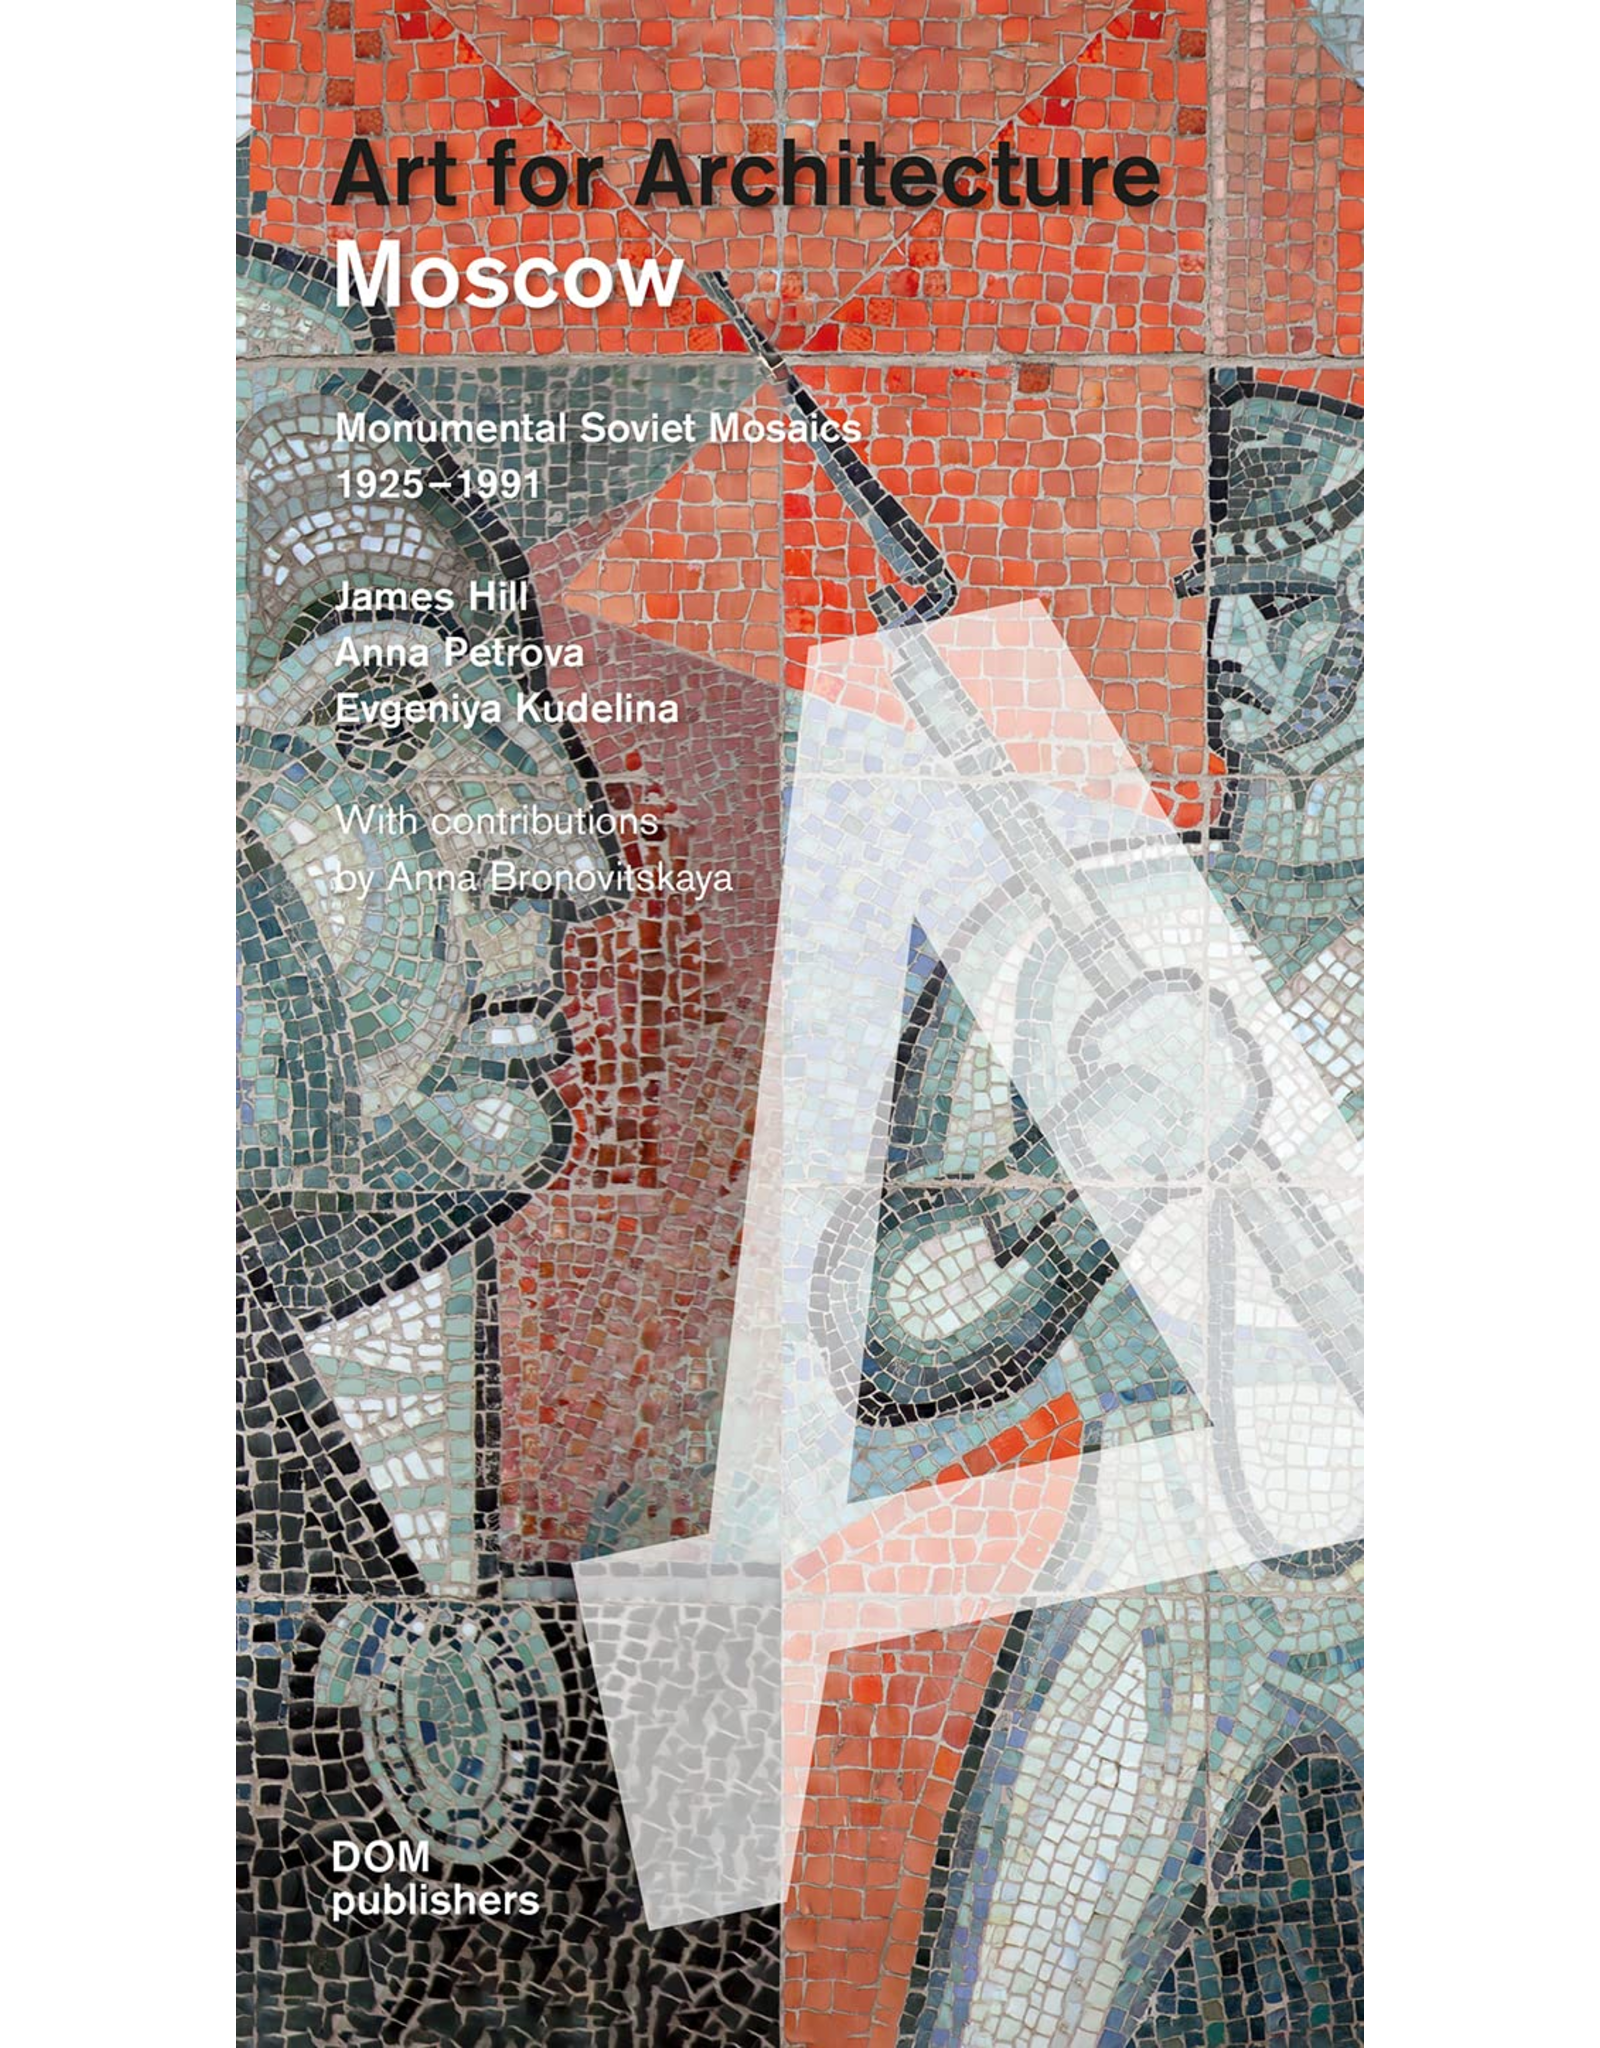 Art for Architecture Moscow: Soviet Modernist Mosaics